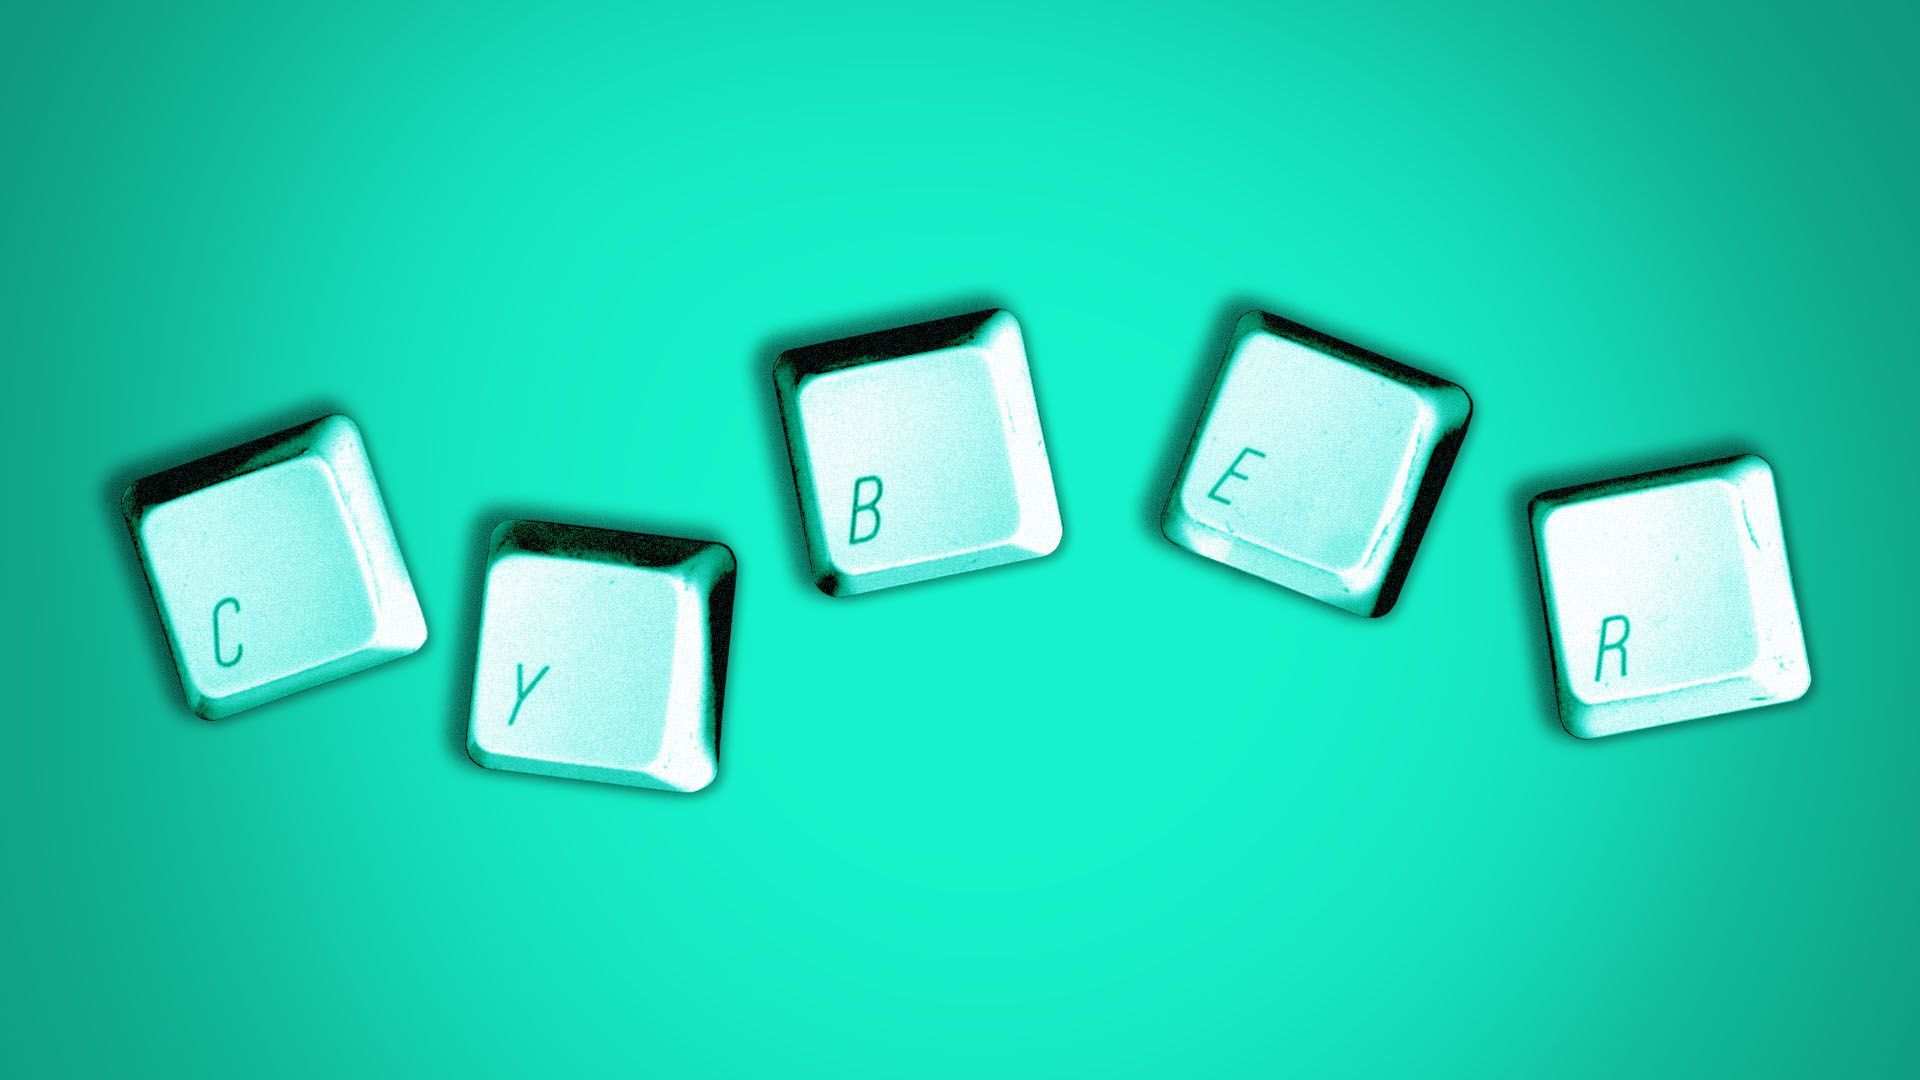 Illustration of detached computer keys spelling out the word cyber